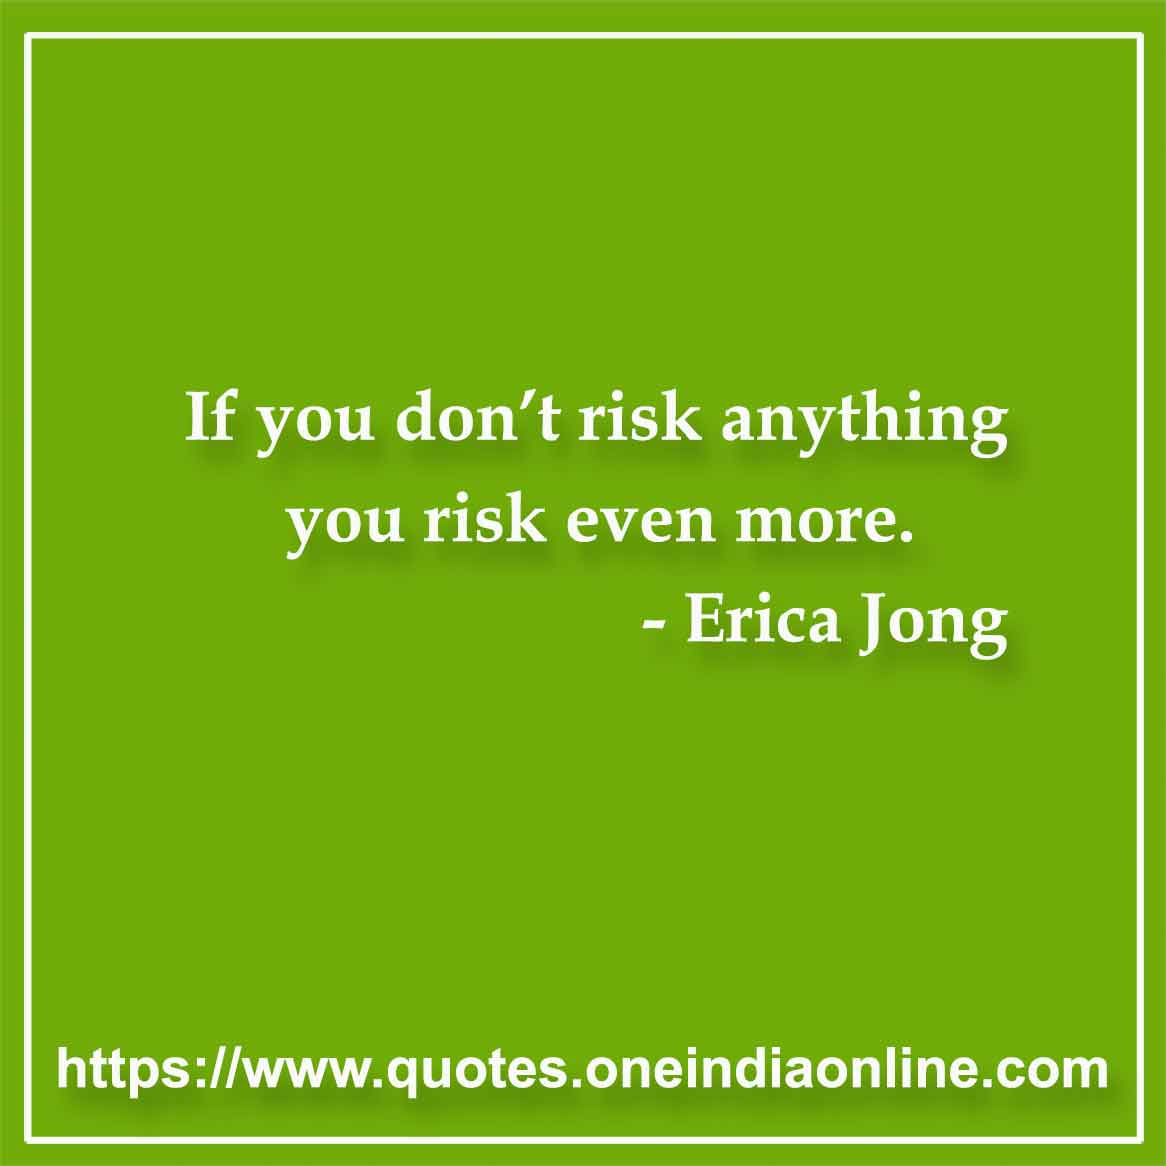 If you don’t risk anything you risk even more.

- Risk Quotes by Erica Jong 